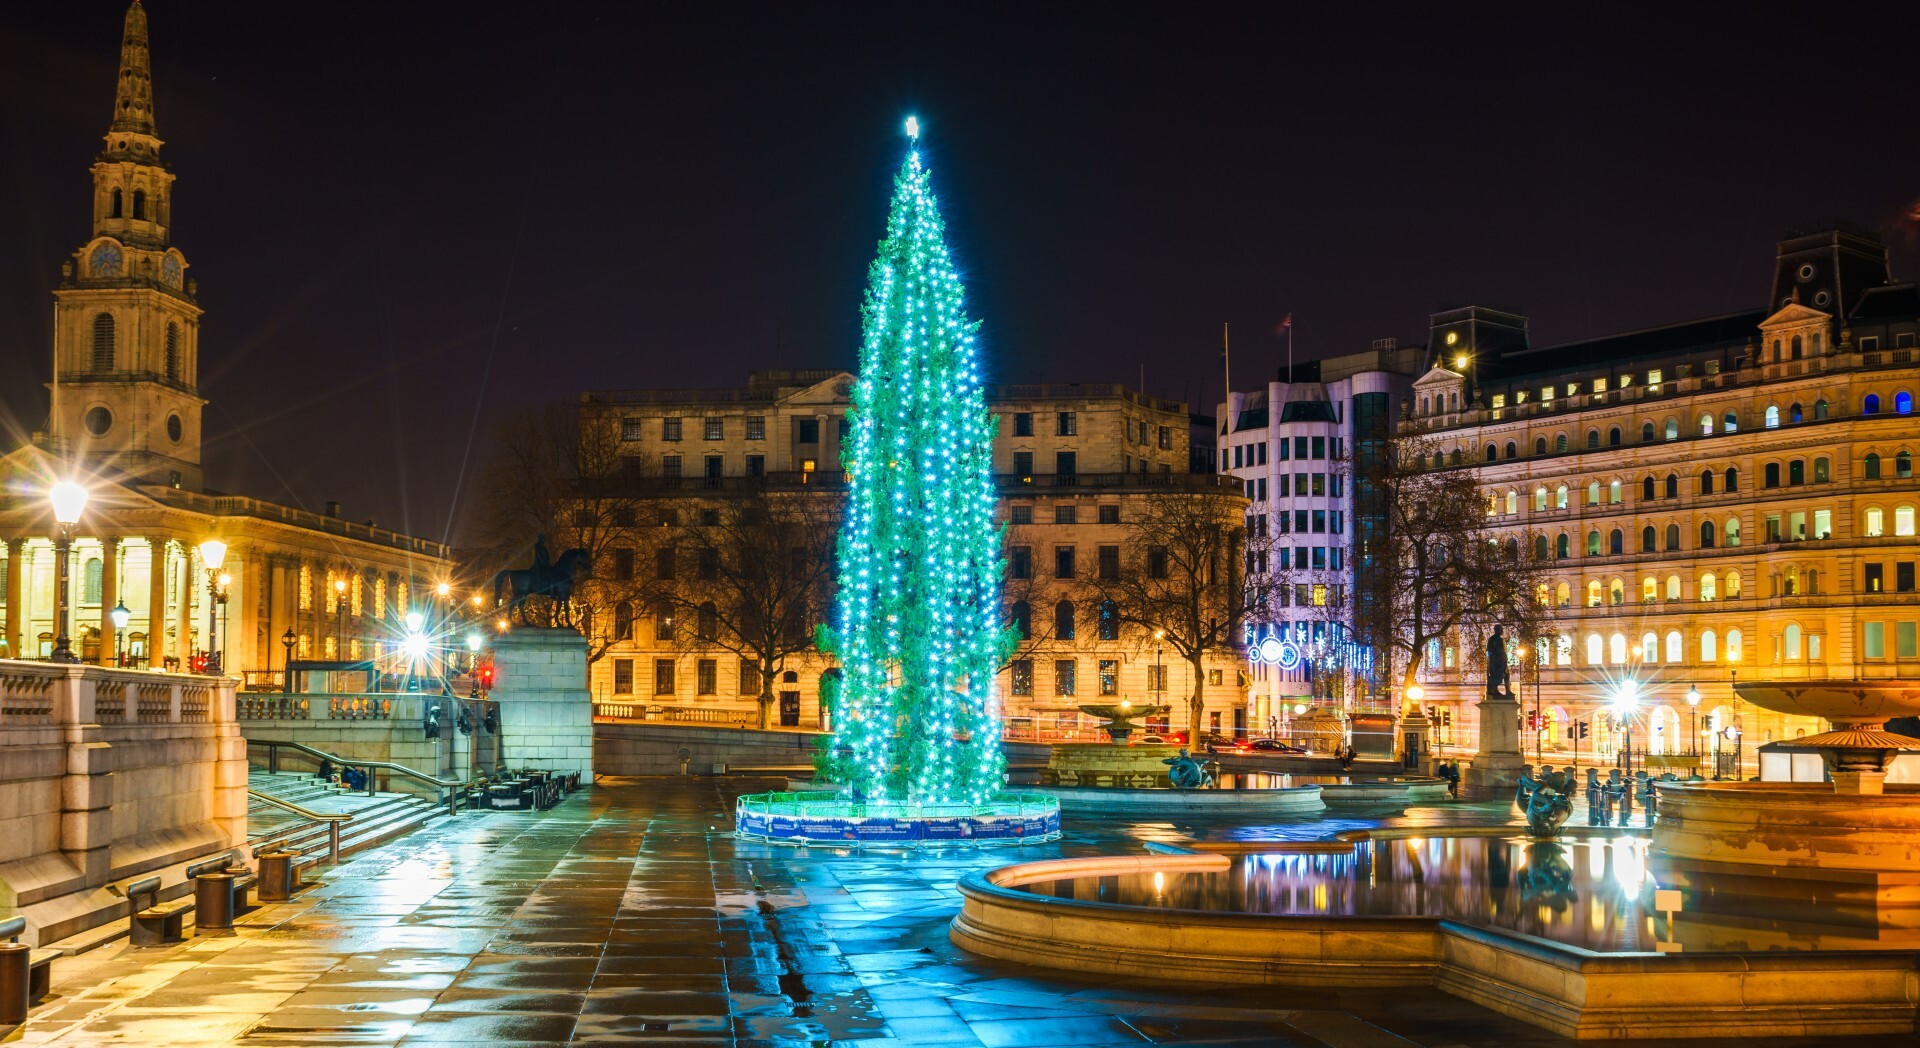 the-trafalgar-square-christmas-tree-has-arrived:-here’s-the-exact-light-up-date-and-time